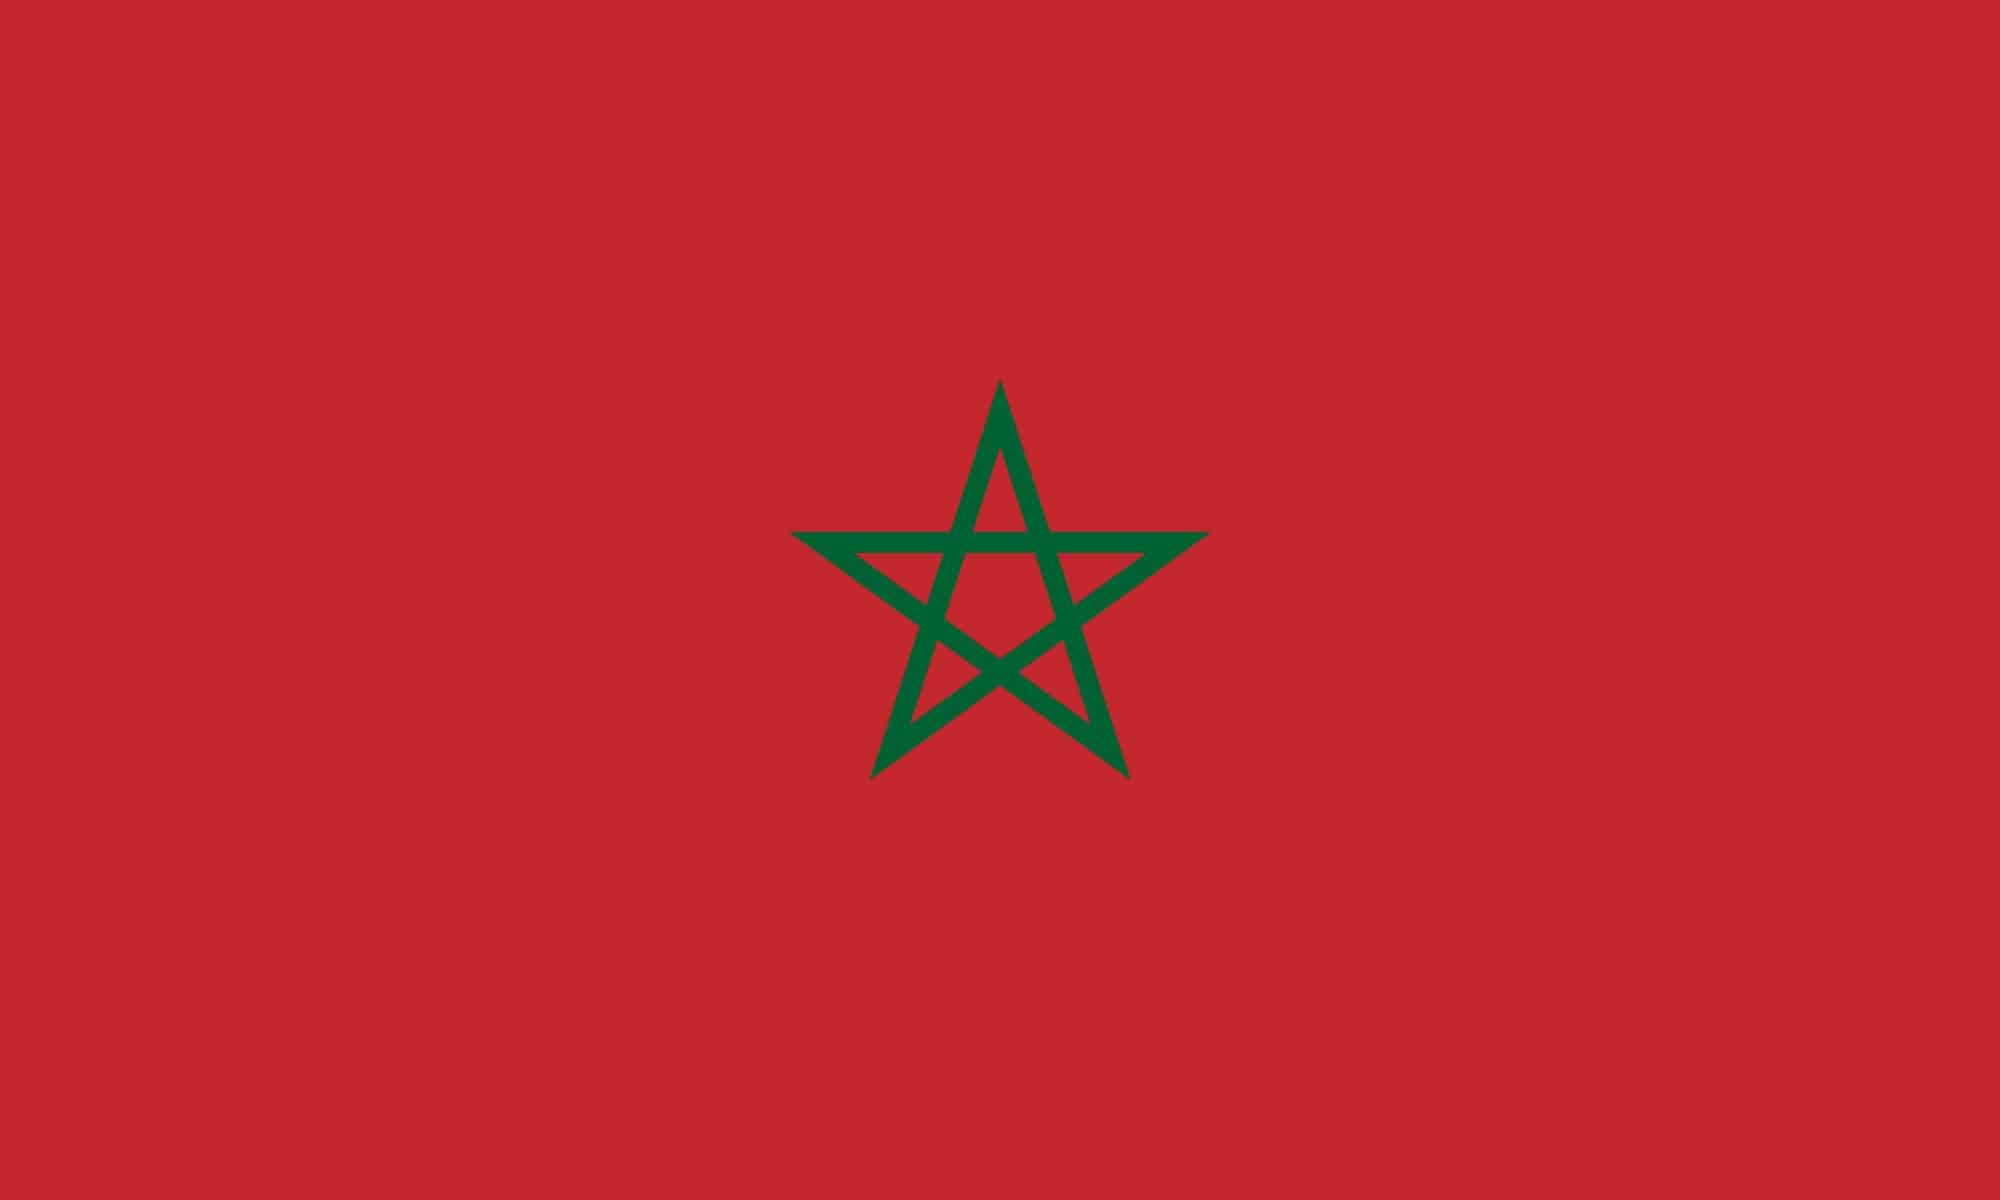 Vector Flag Of Morocco Proportion 2 3 Moroccan National Flag  S1024x1024wisk20cd6fzP0EFlbEZy AUfVsEiE3pyrPxnQkWCtd8guFmn 0 